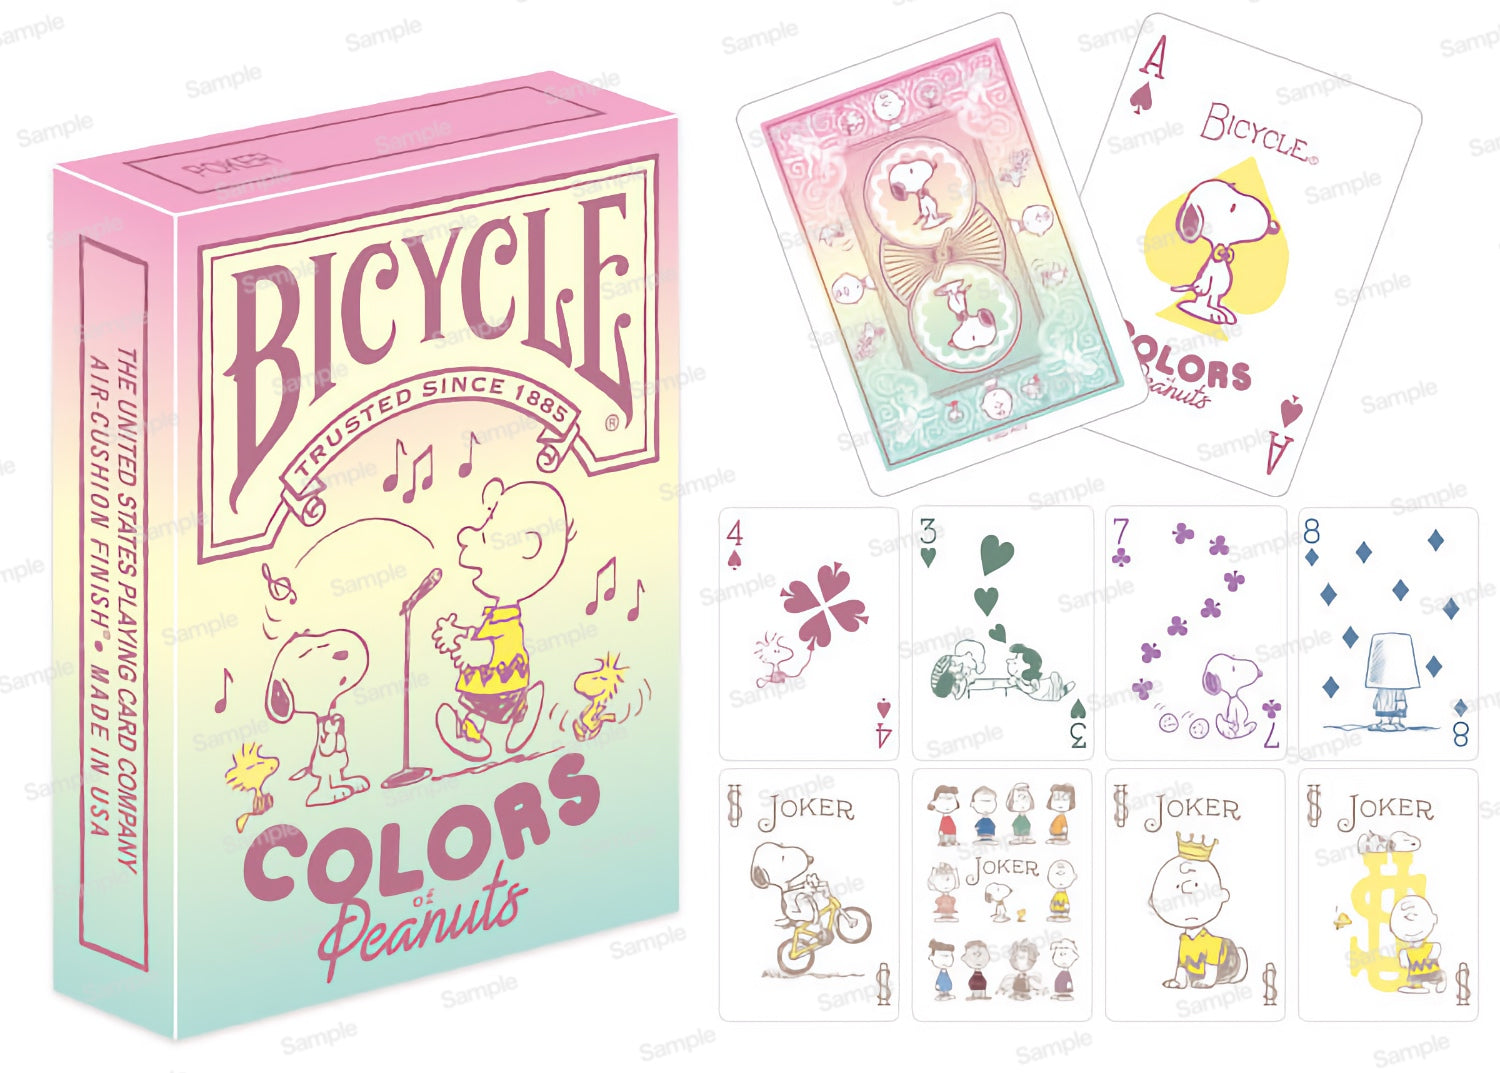 Bicycle Colors of Peanuts Snoopy Playing Cards